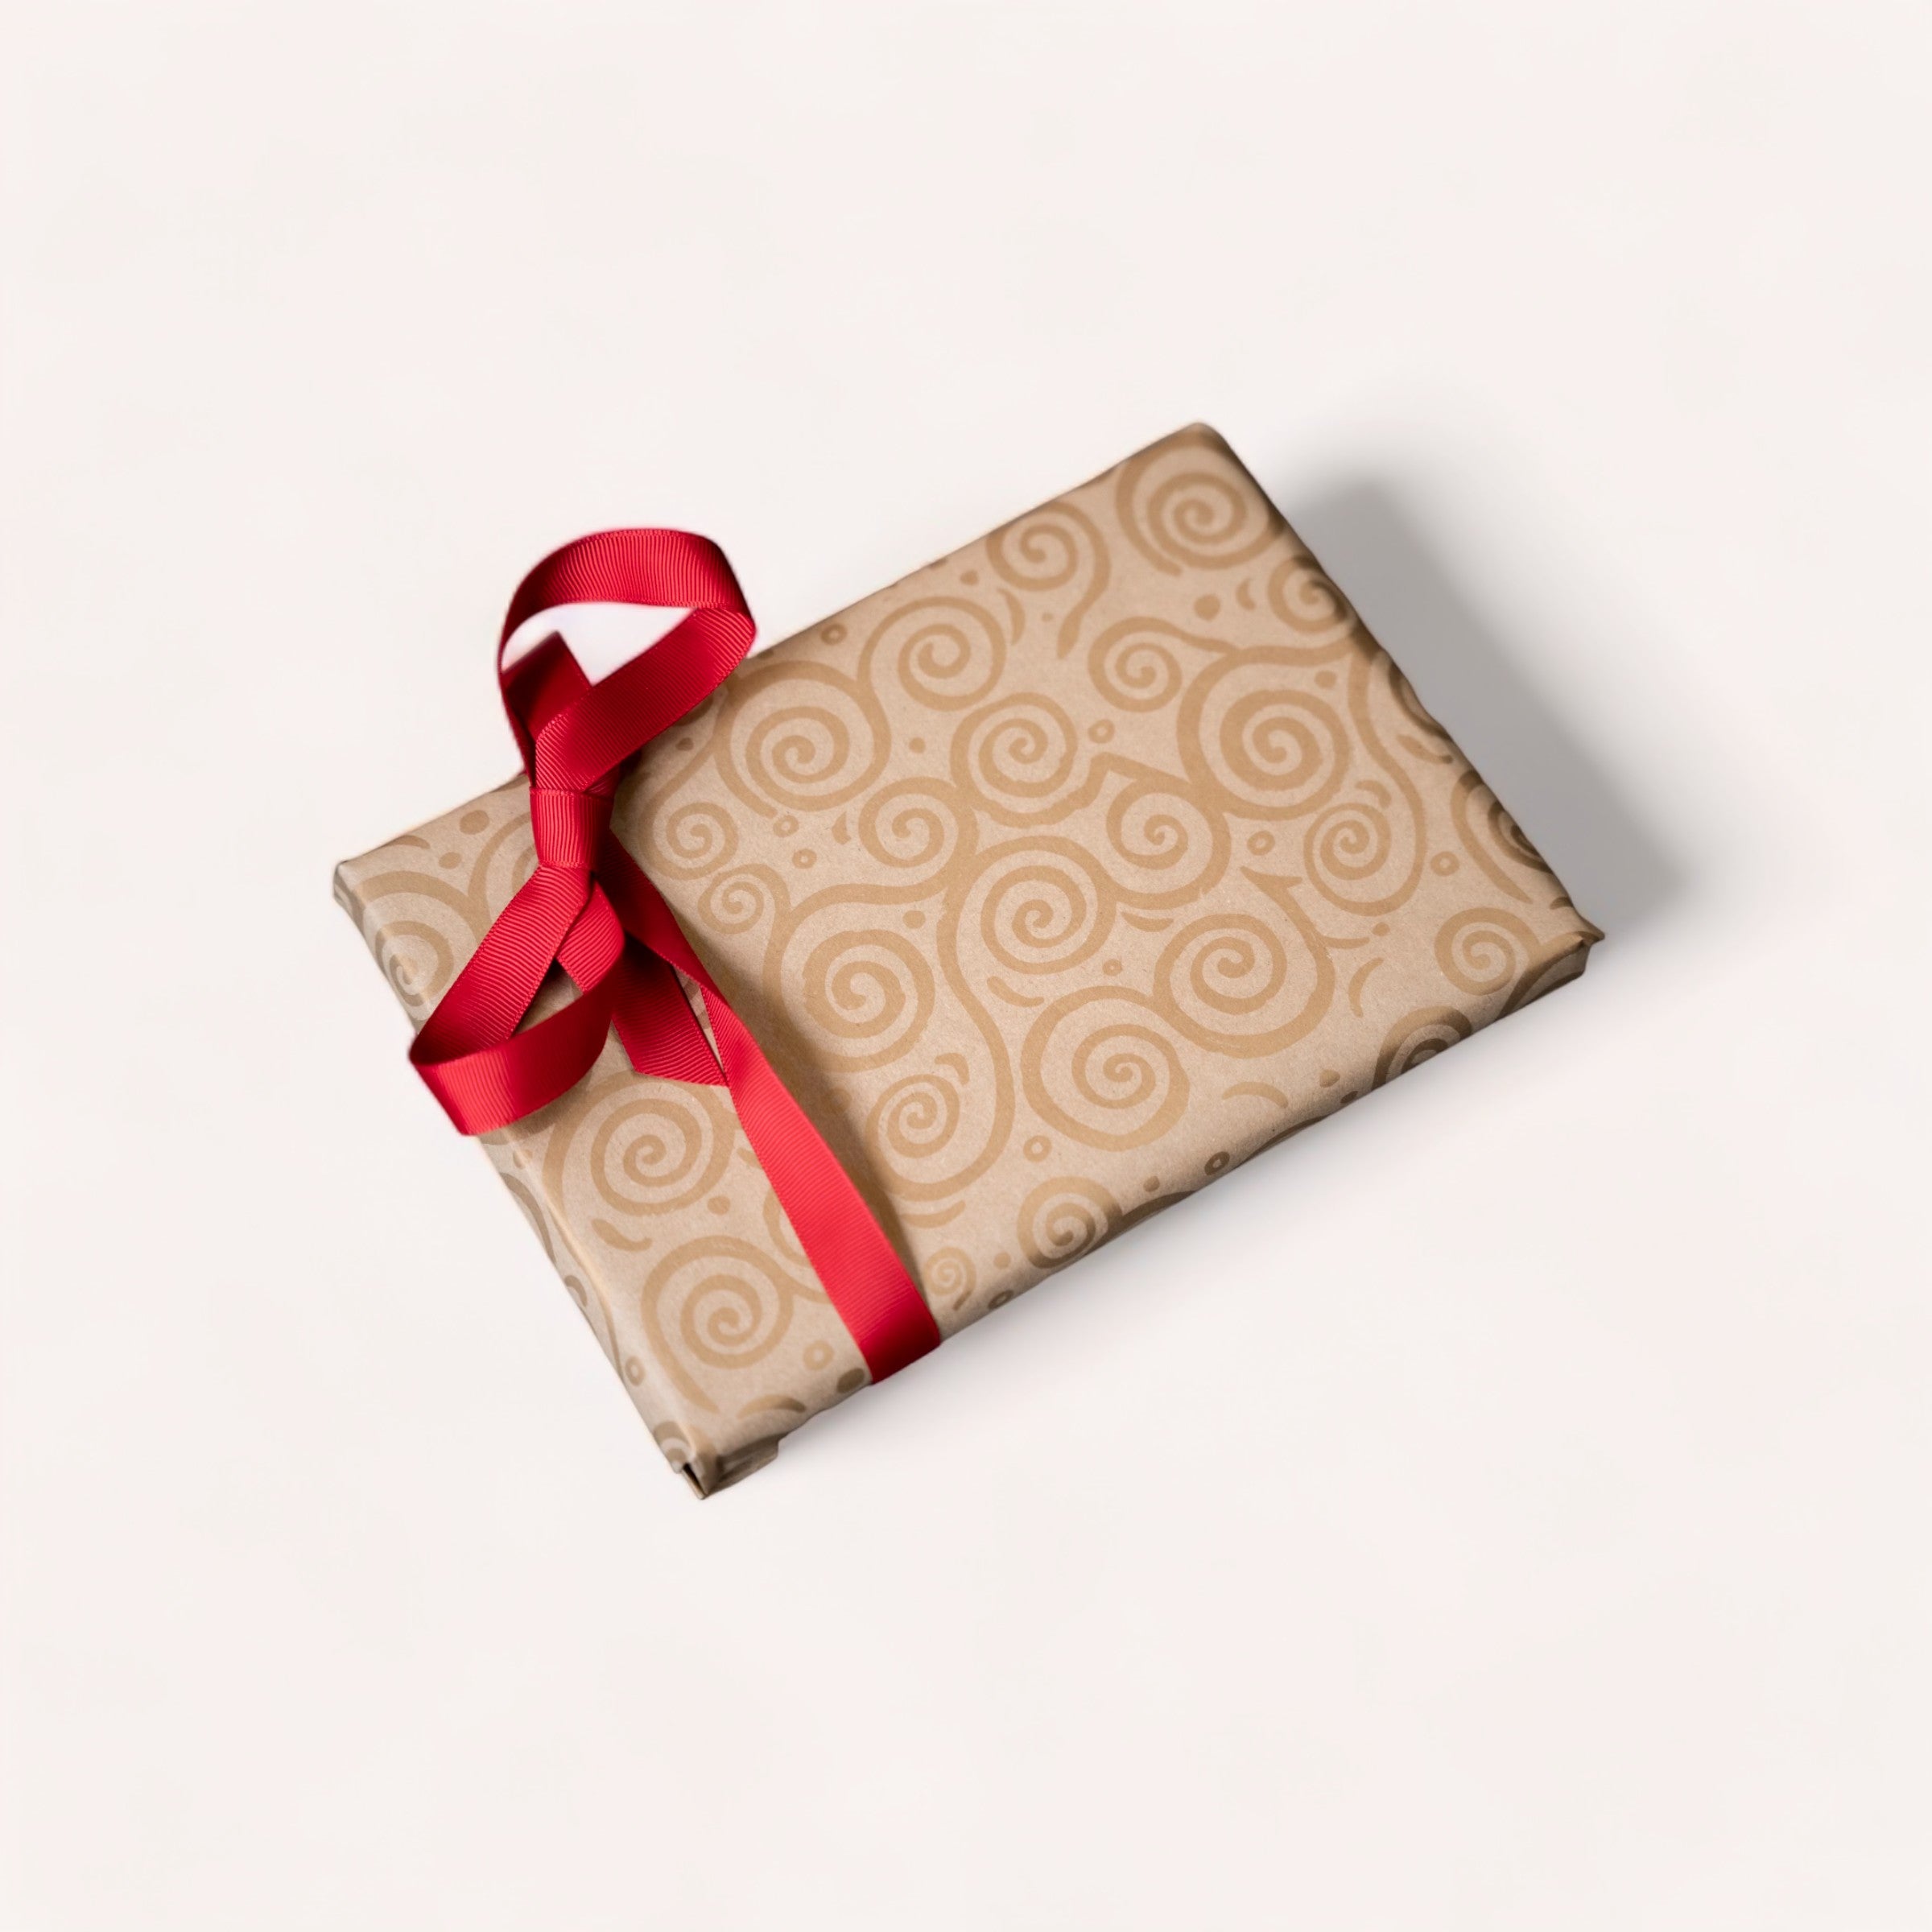 A neatly wrapped gift with a red ribbon, using premium 65gsm giftbox co. paper, against a clean white background.